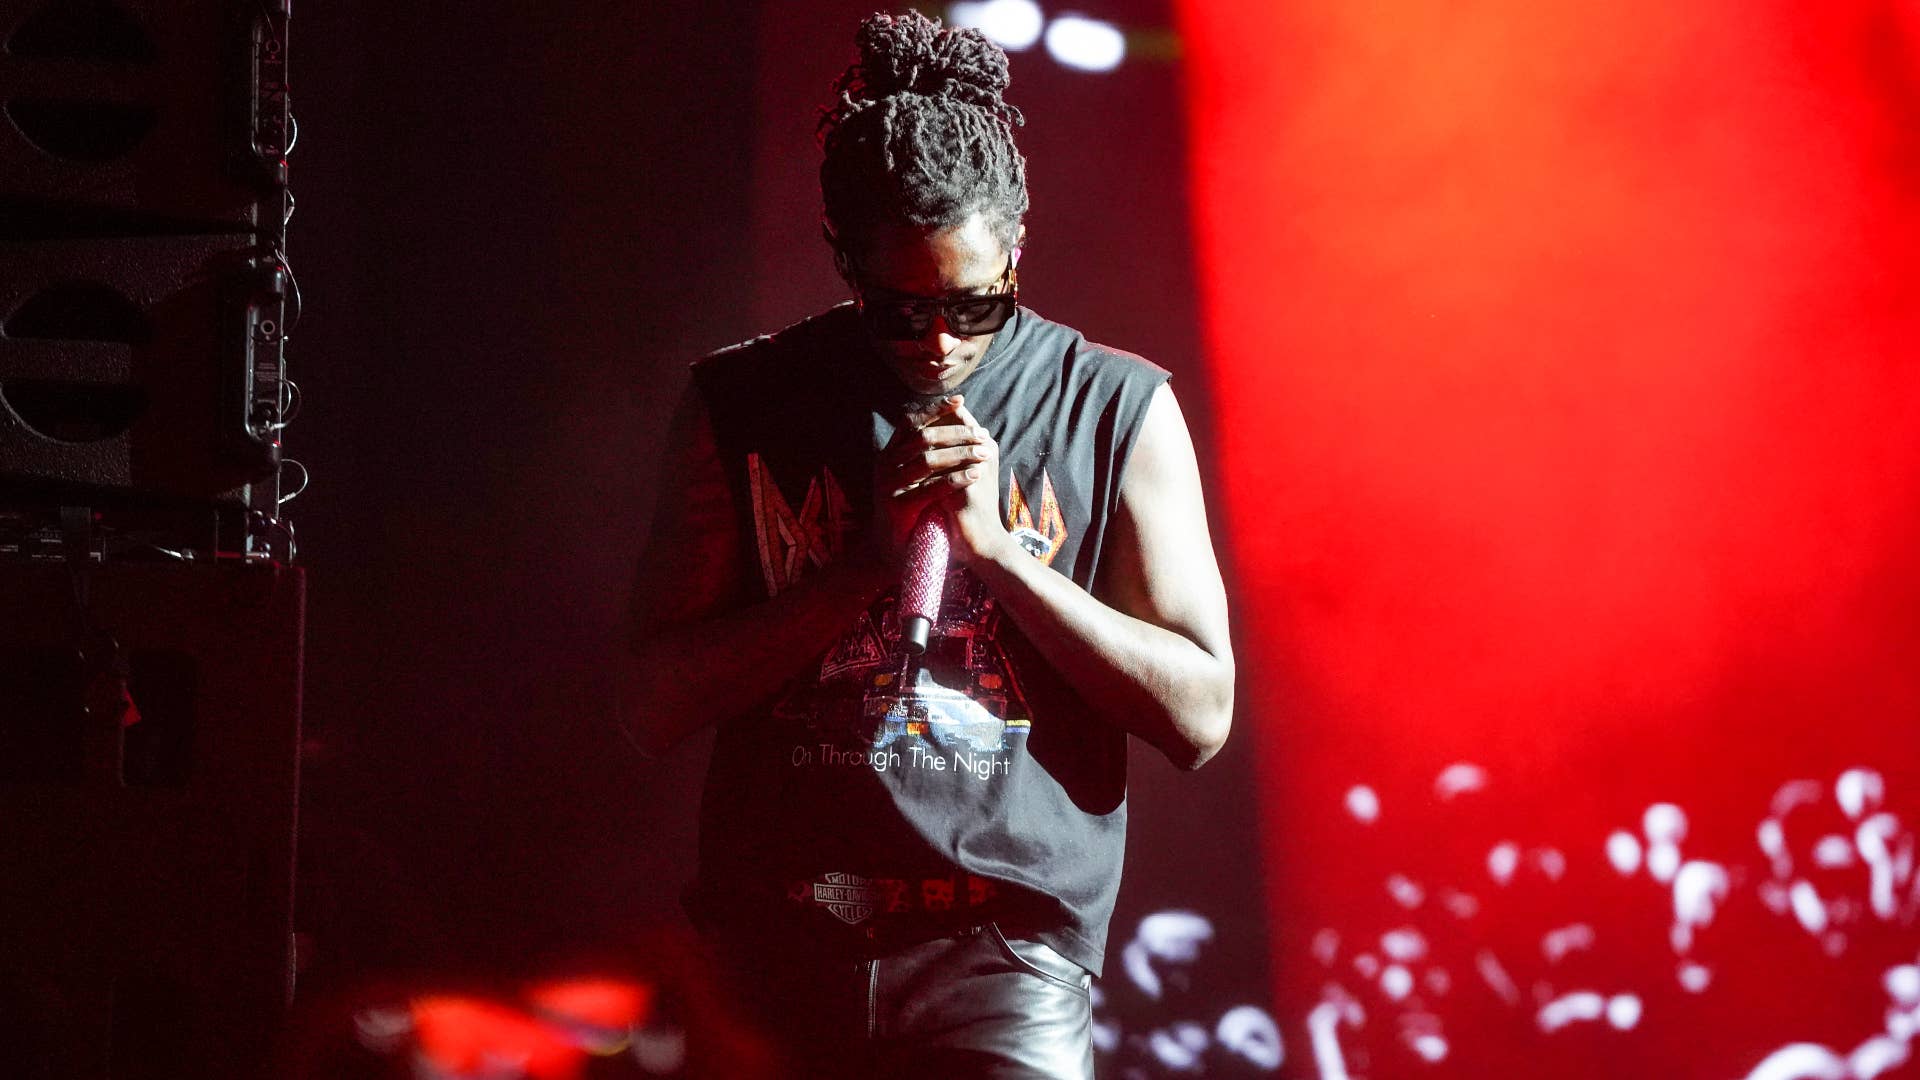 Young Thug is seen performing live